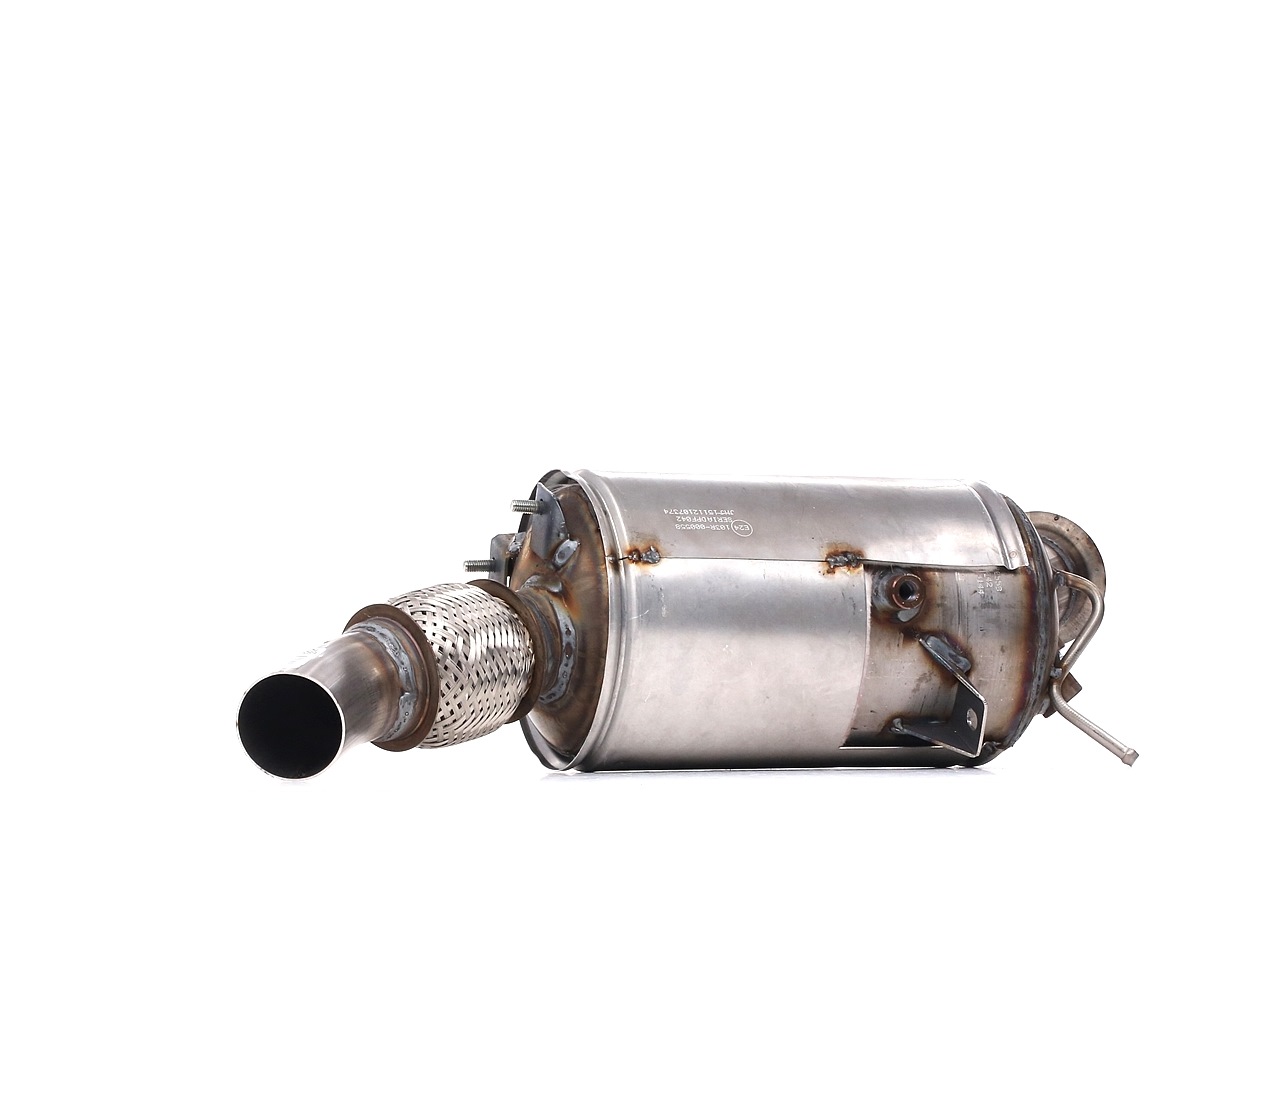 Original 1103 JMJ Diesel particulate filter experience and price